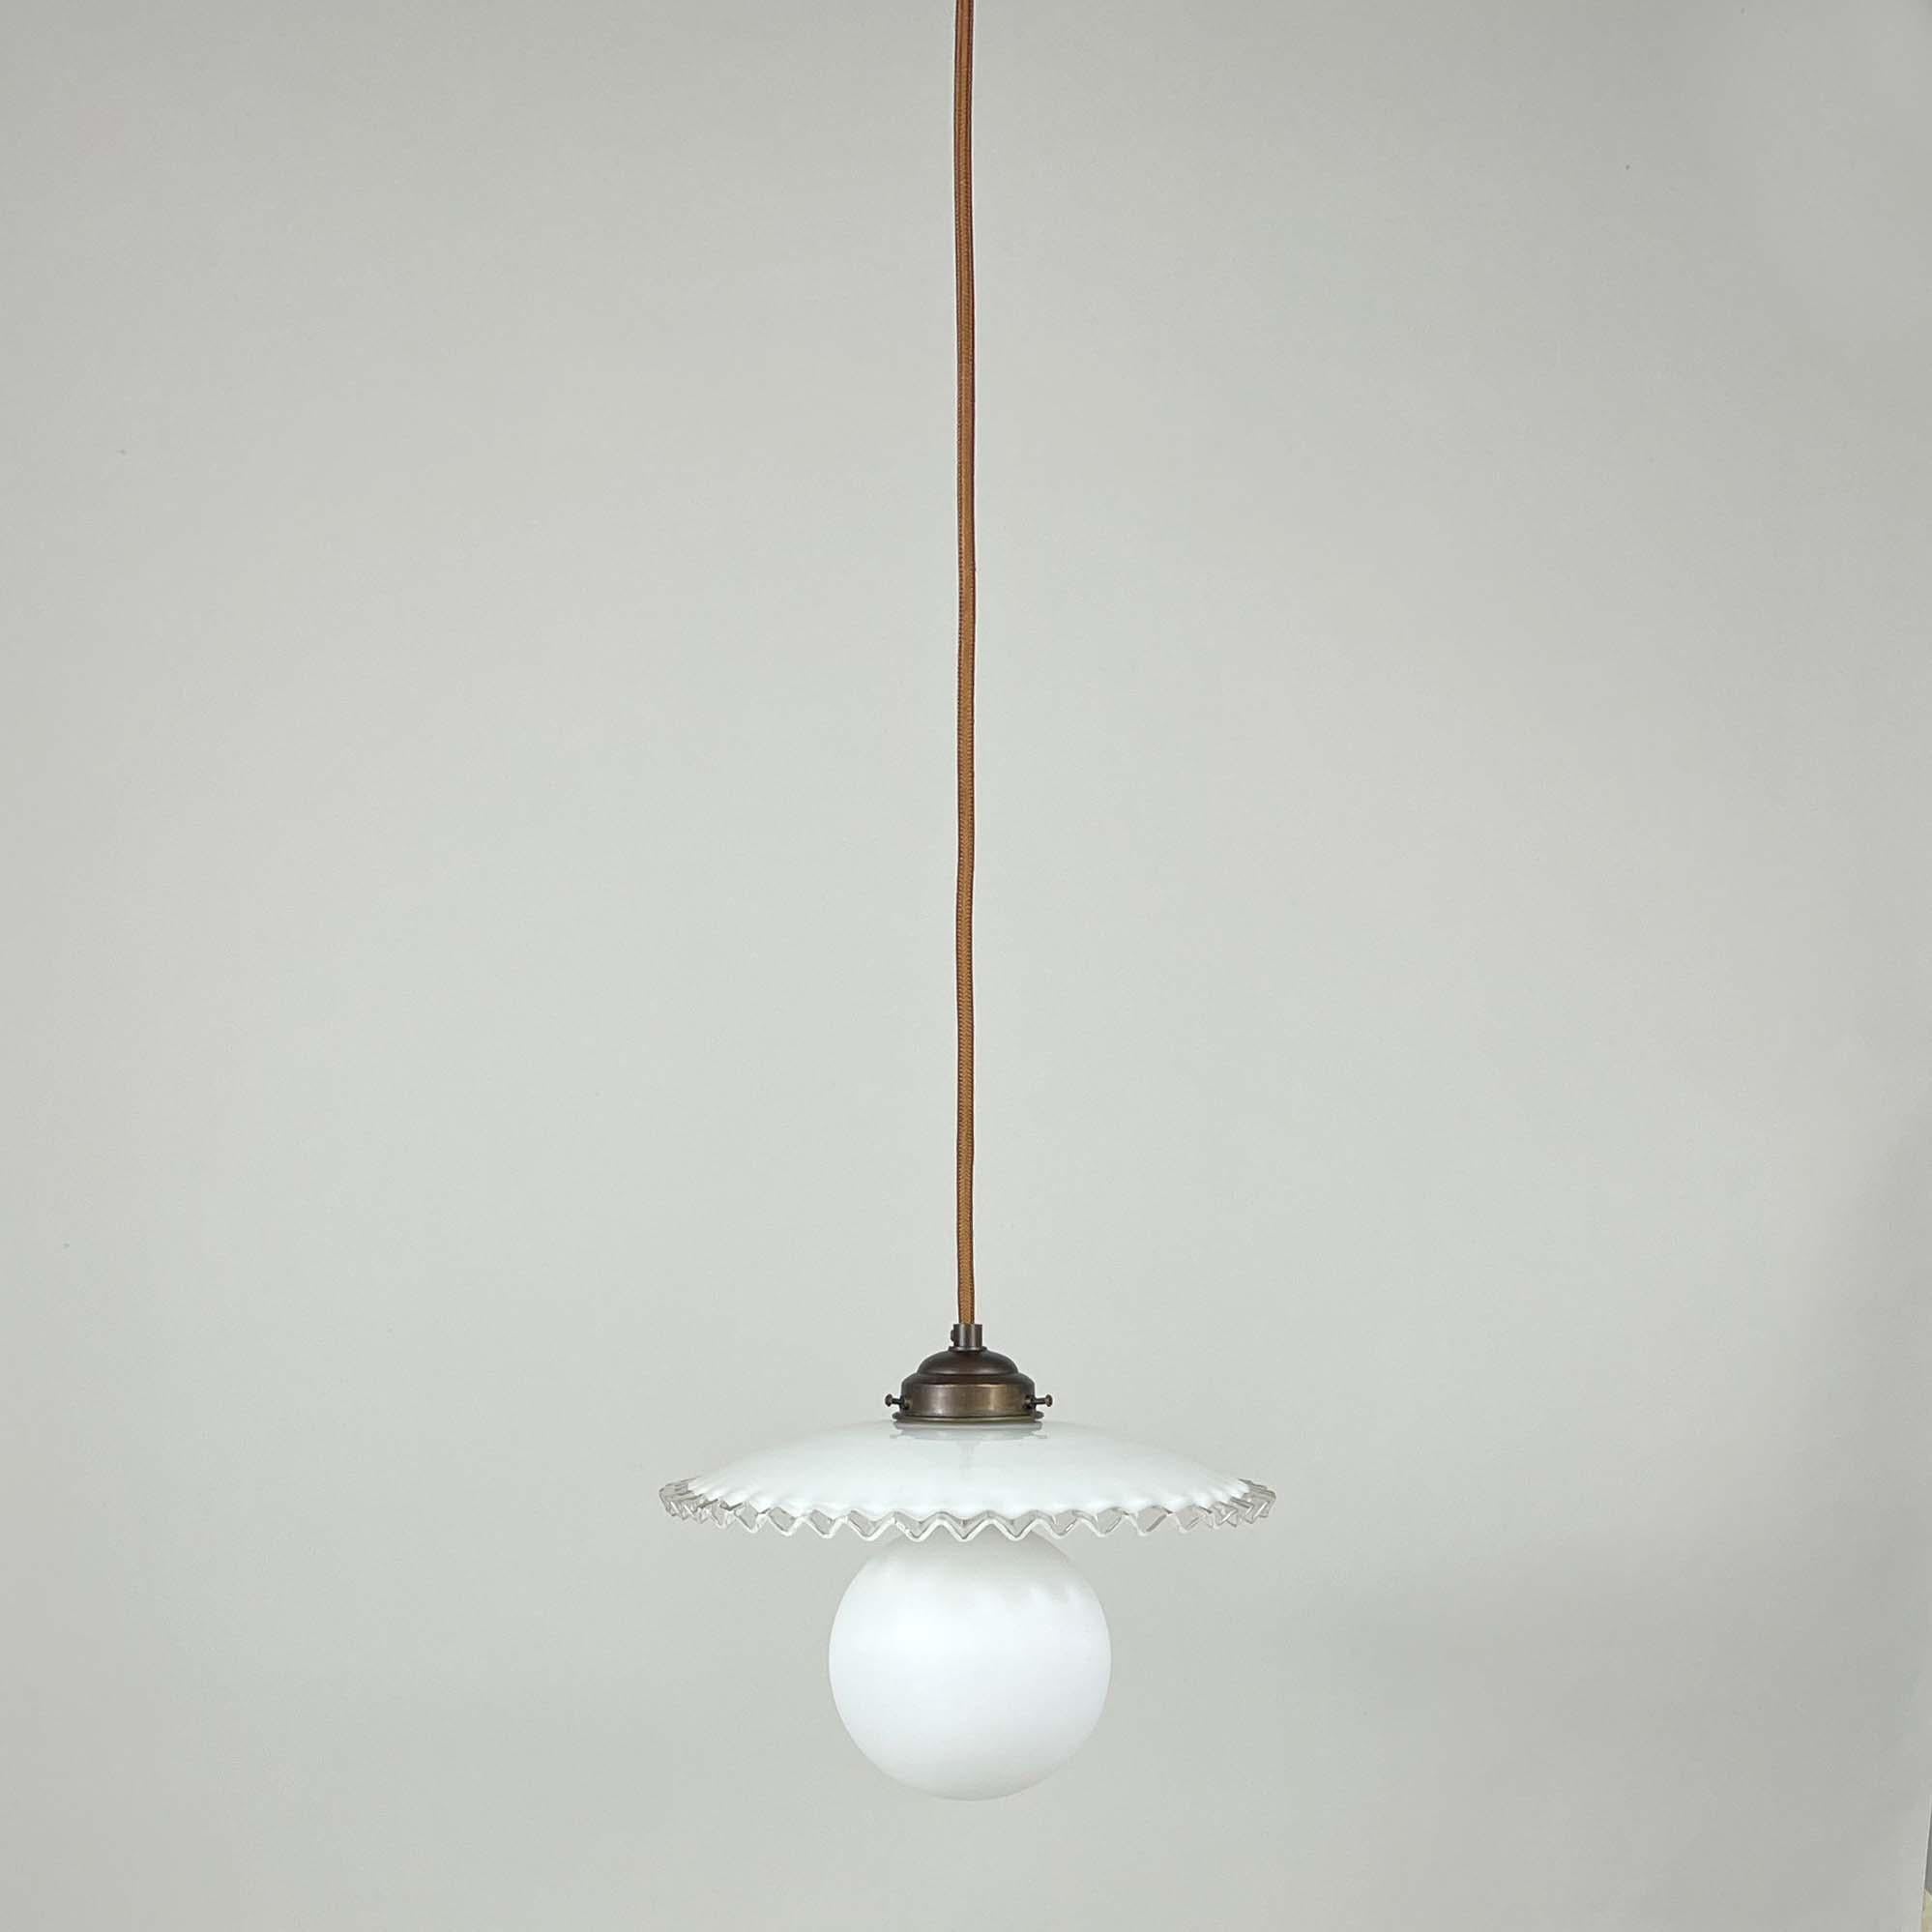 Mid-20th Century Midcentury French Opaline Glass Pendant Light, 1950s For Sale